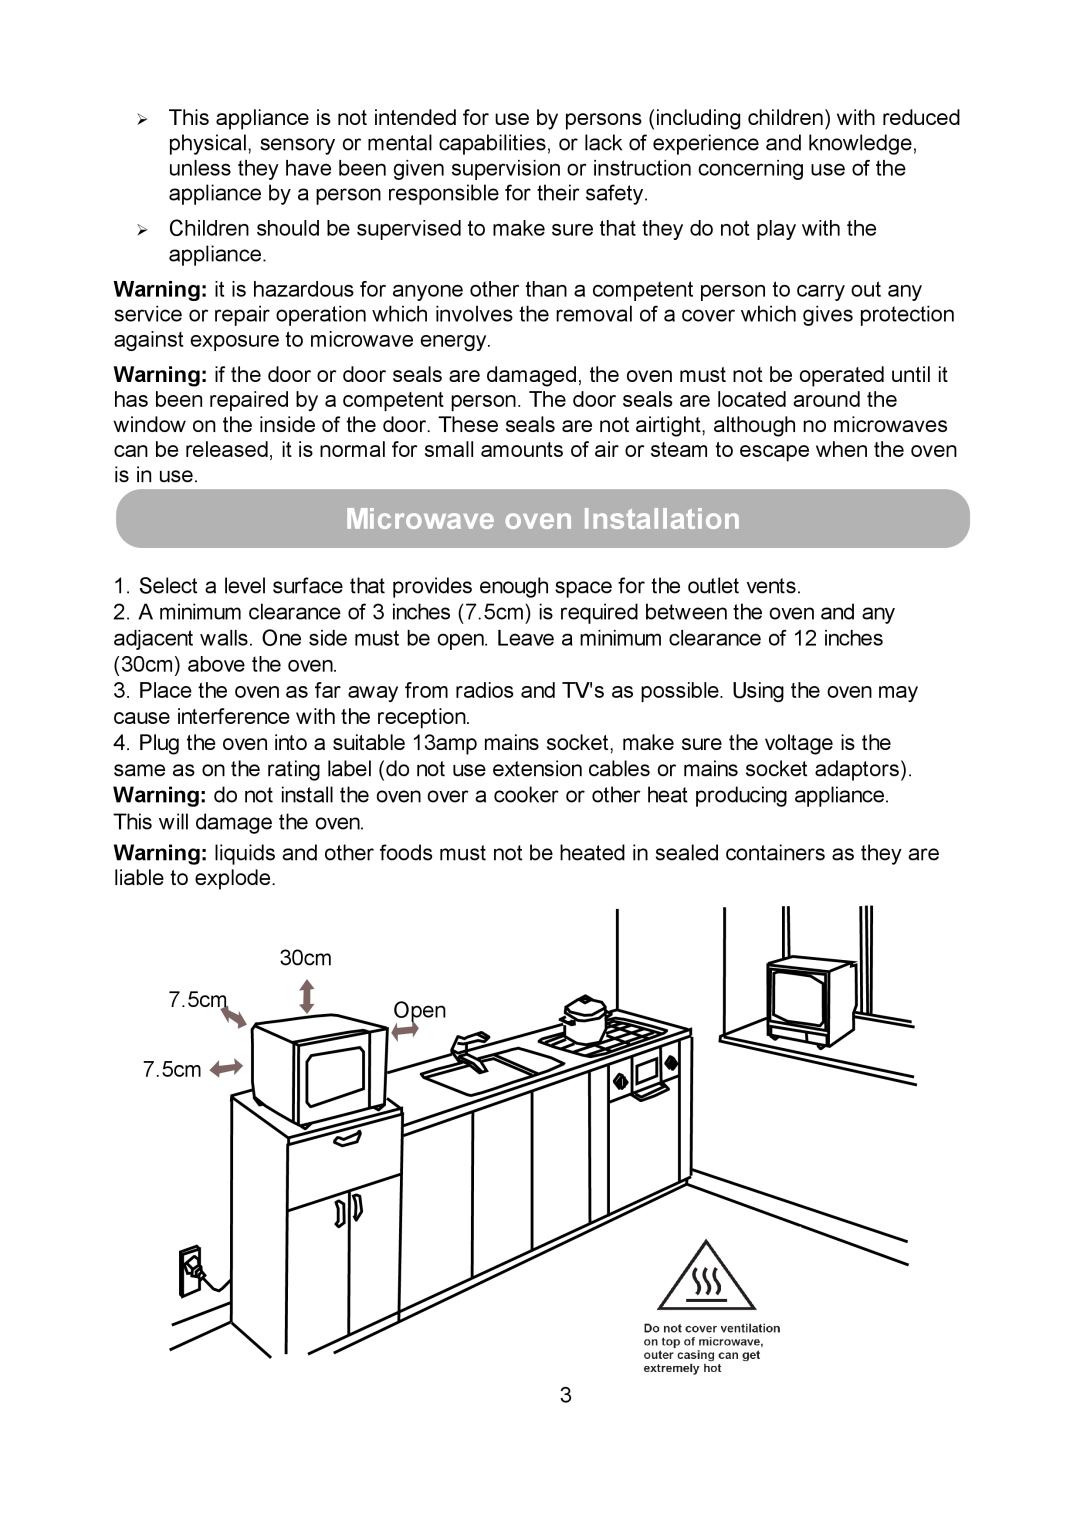 Russell Hobbs RHM2010S instruction manual Microwave oven Installation 